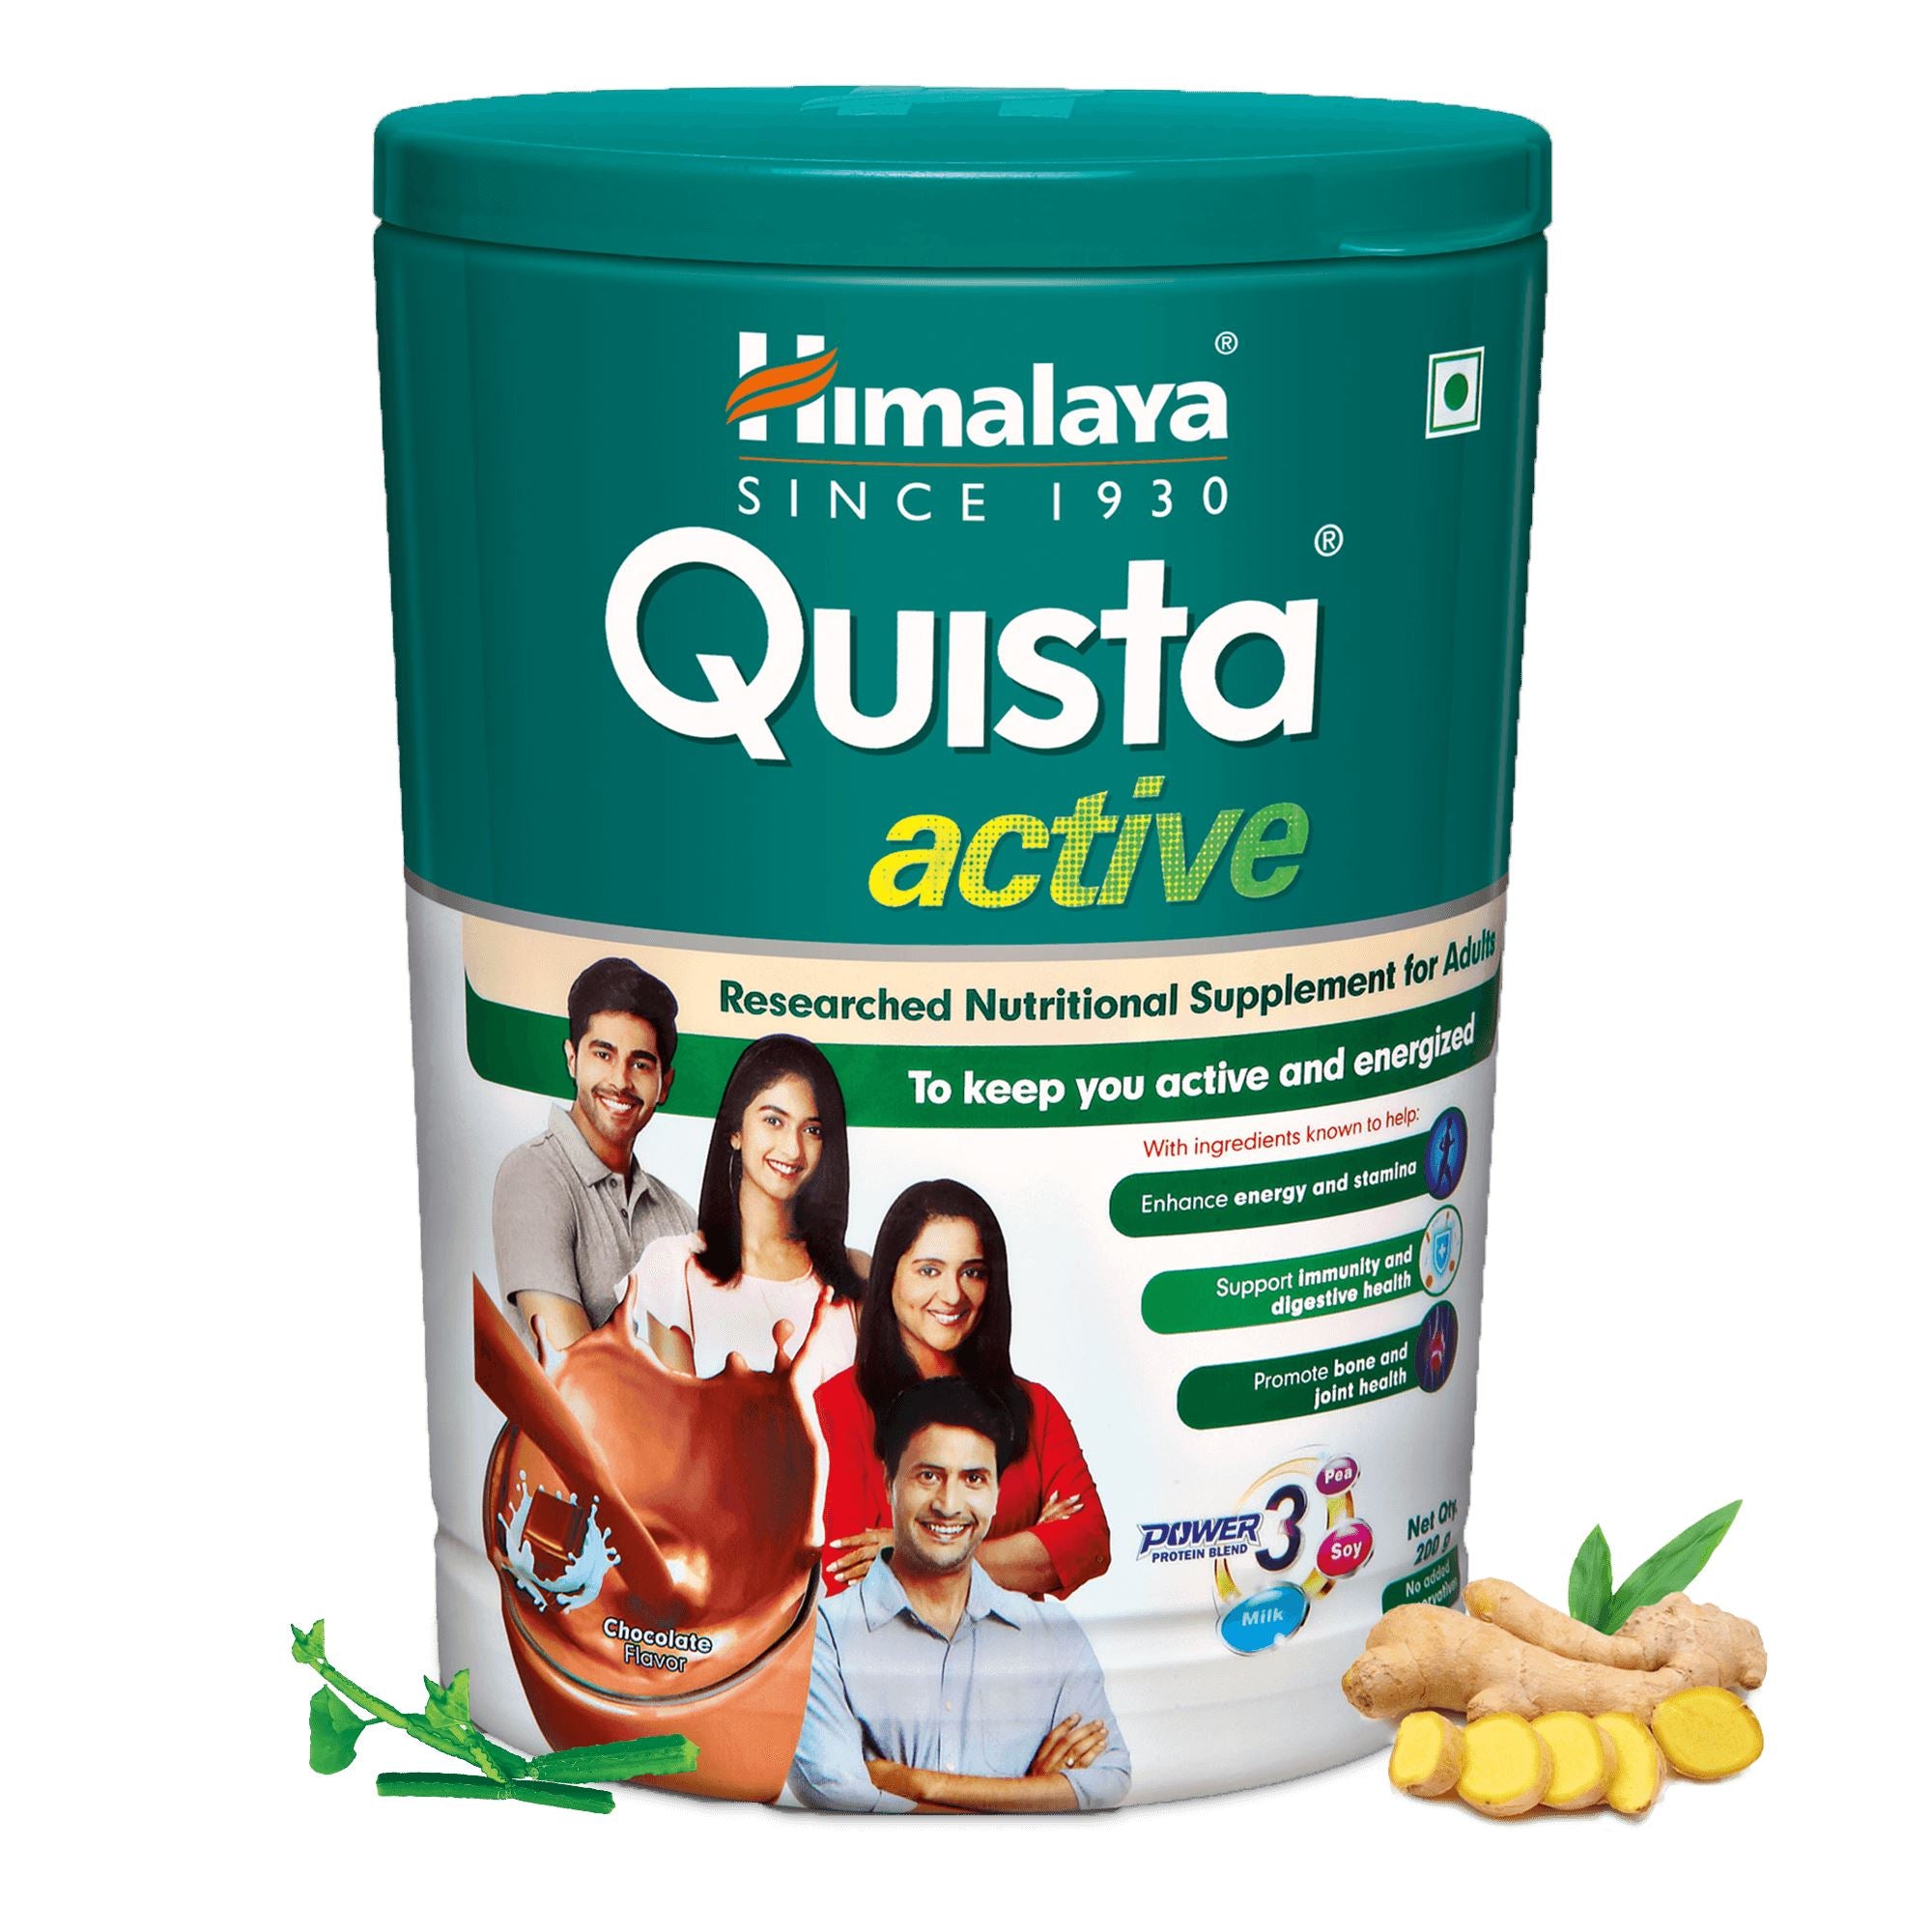 Himalaya Quista Active Chocolate 200g - Nutritional Supplement for Adults